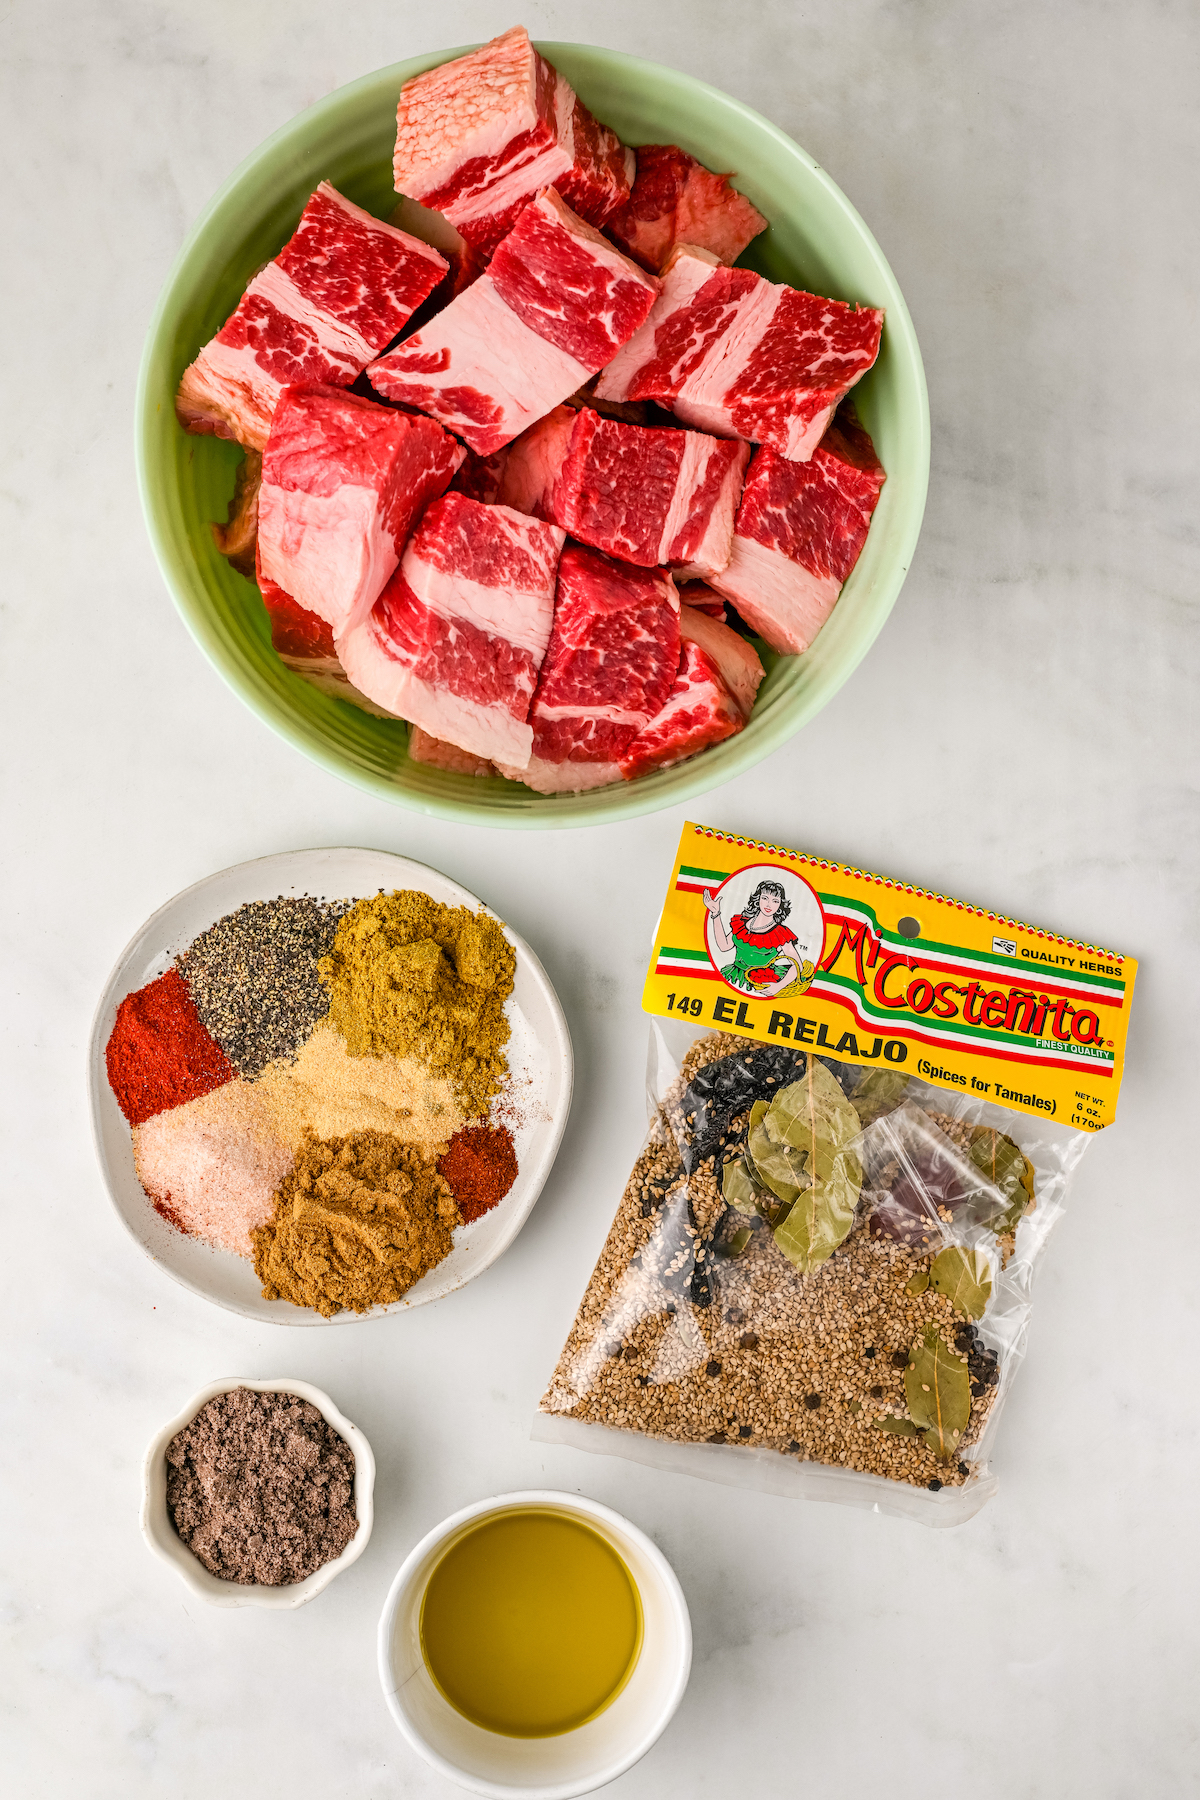 Ingredients for the filling for a beef tamale recipe arranged in bowls on a countertop.